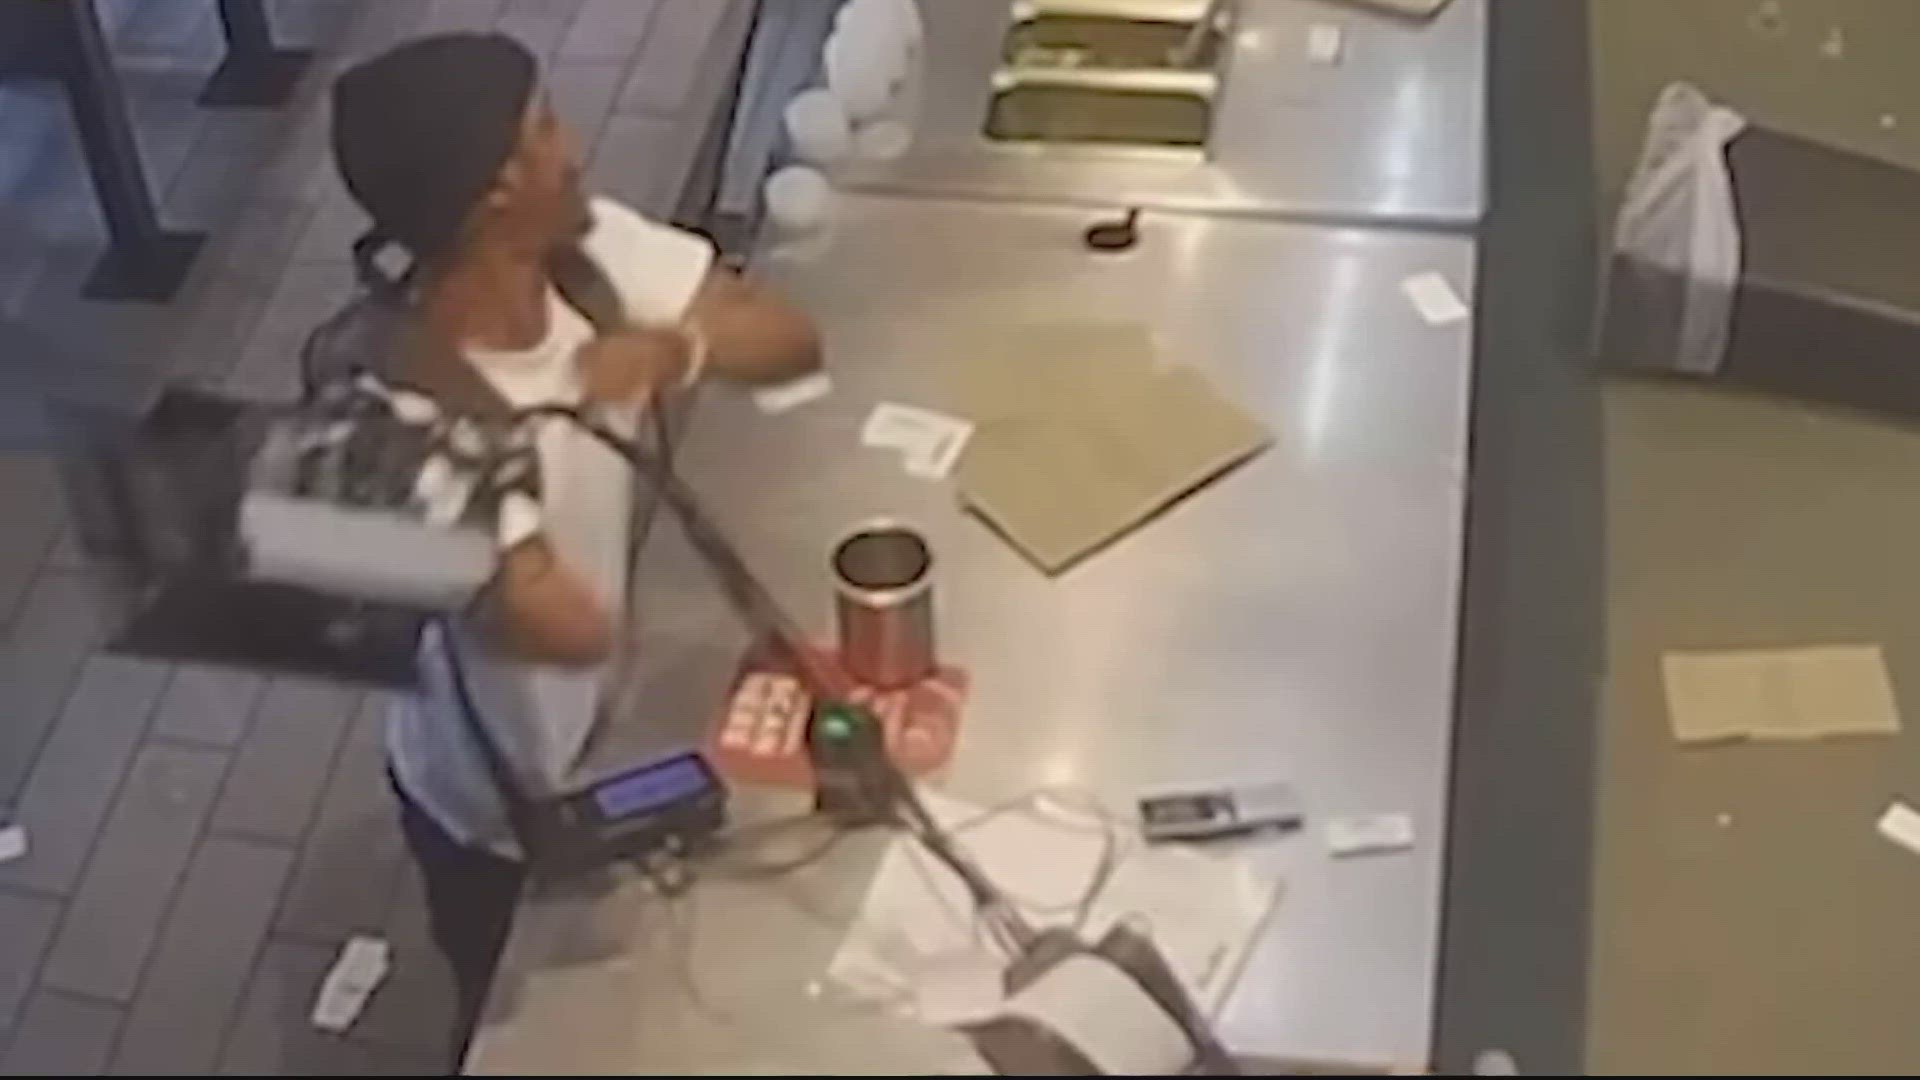 Police are investigating after a person was caught on camera throwing a cash register at a D.C. Chipotle Sunday afternoon.